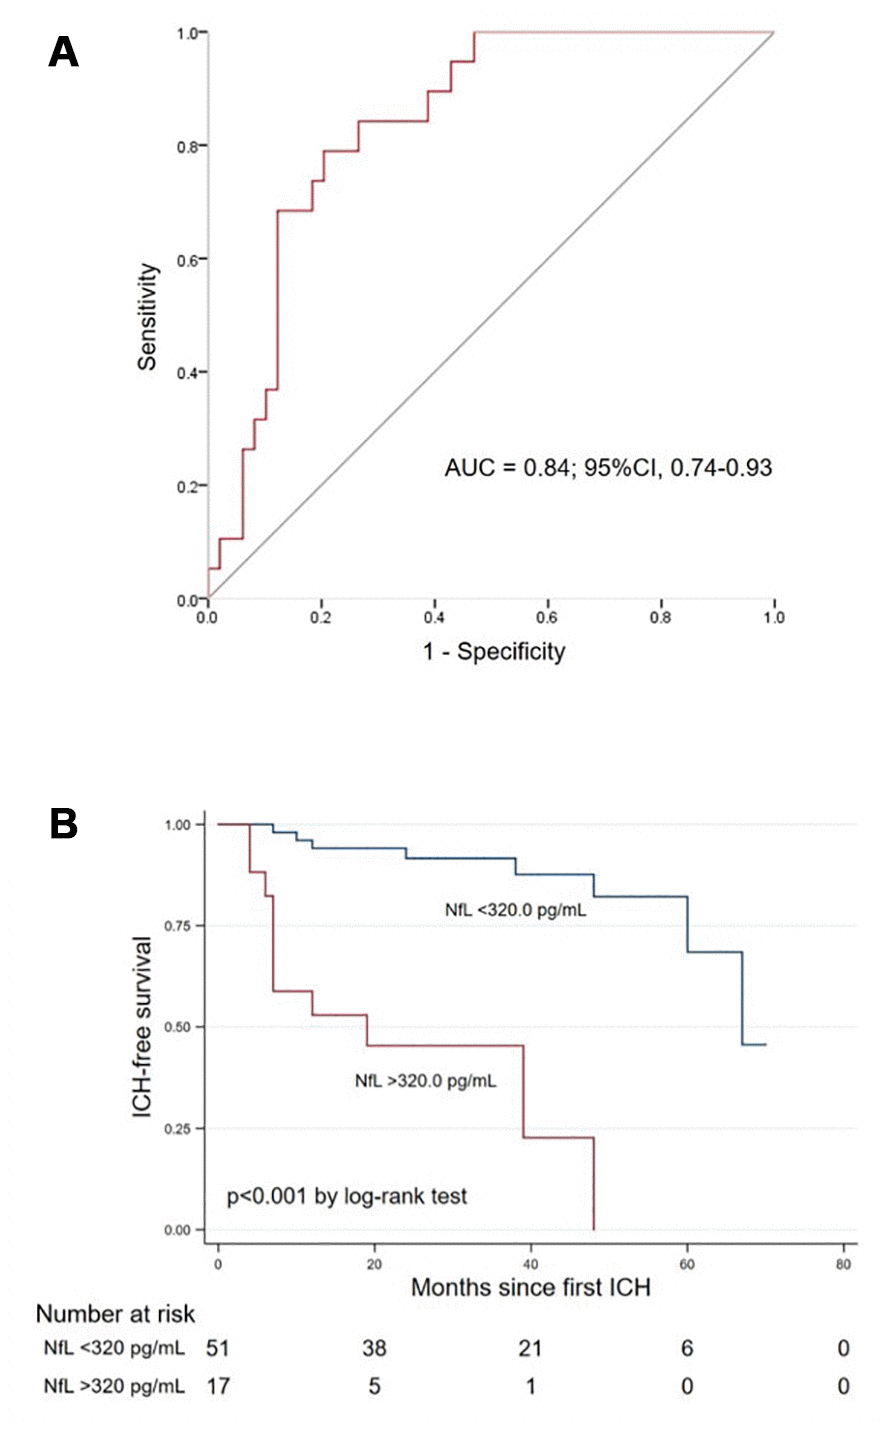 (A) Receiver operating characteristic curve of blood NfL for predicting ICH recurrence in cases with CAA. (B) Kaplan–Meier curve showing the ICH-free survival probability in CAA-ICH cases with blood NfL above vs. below 320.0 pg/mL. Abbreviations: NfL, neurofilament light chain; CAA, cerebral amyloid angiopathy; ICH, intracerebral hemorrhage; AUC, area under the curve.